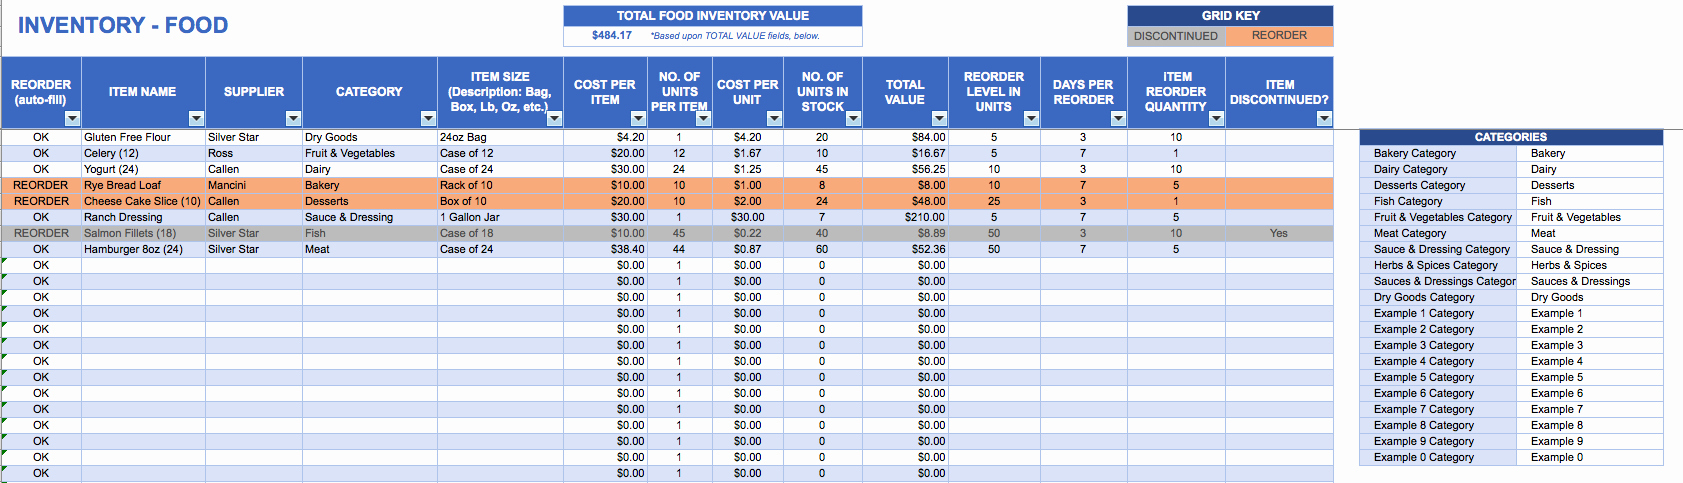 Restaurant Inventory Spreadsheet On Excel Spreadsheet Templates Throughout Excel Spreadsheet Templates For Inventory